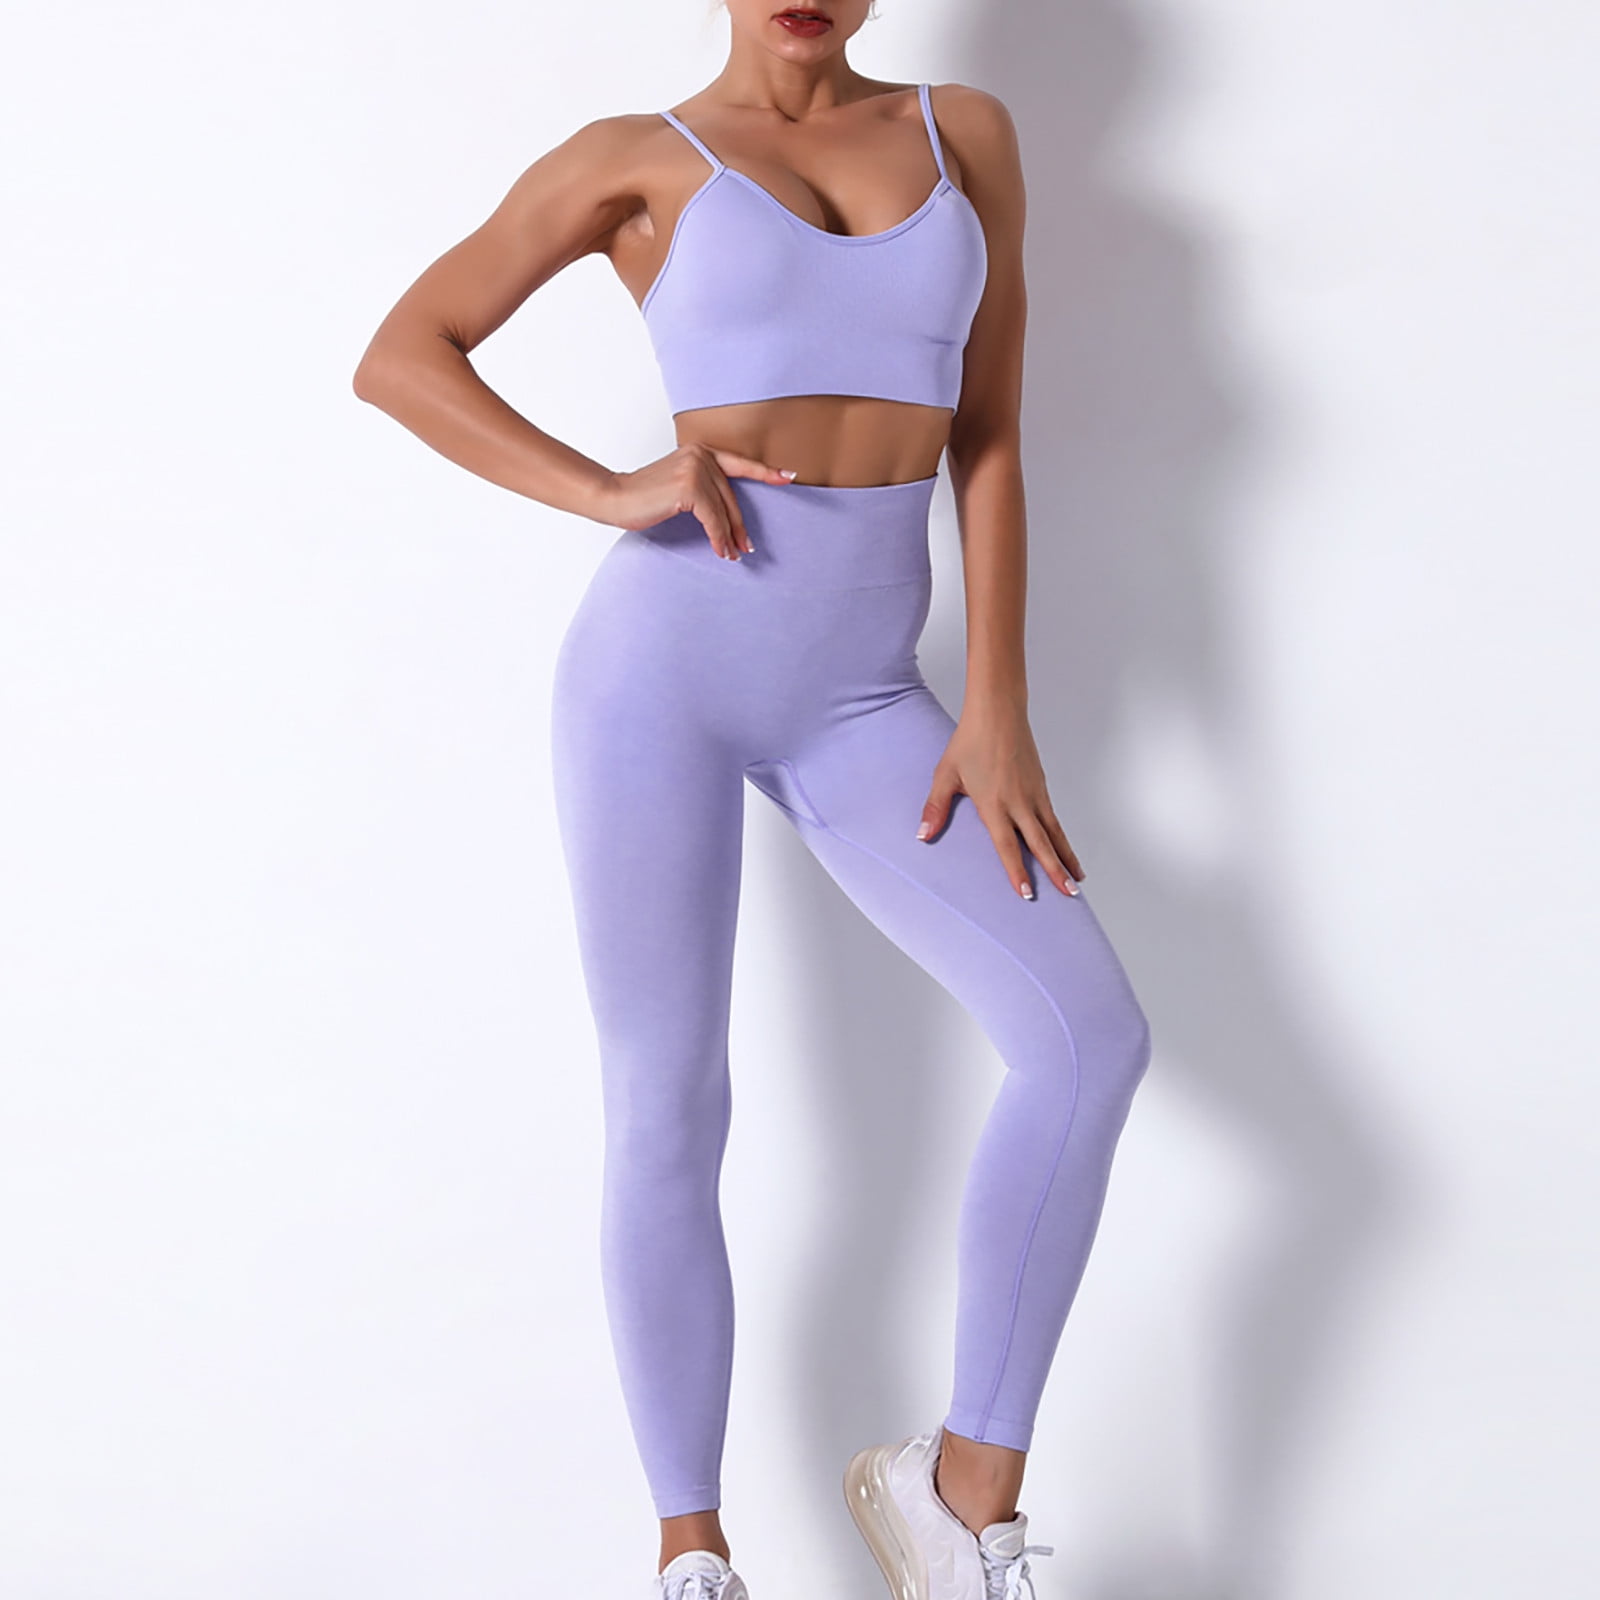 Women's Active Wear Matching Set. (6 Pack) Matching Set Includes Leggings  and Matching Sports Bra. - 4 Elastic Waistband Biker Shorts - Ruched  Details - Metallic Finish for Sparkly Look - Sports